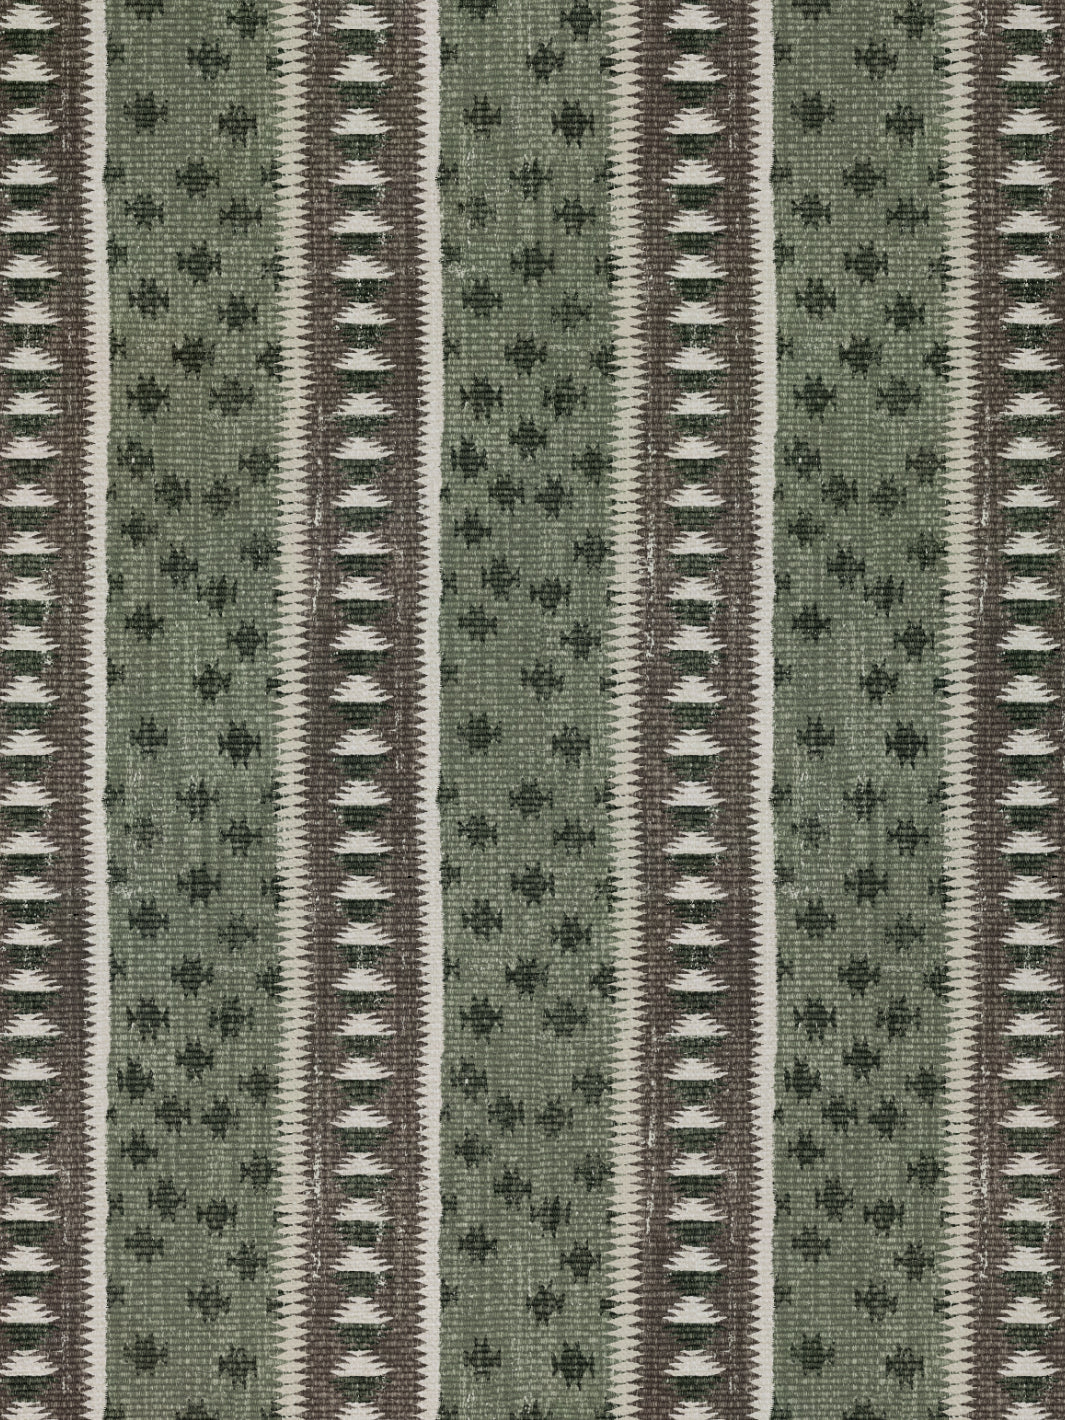 'Northstar Stripe' Linen Fabric by Nathan Turner - Moss Brown